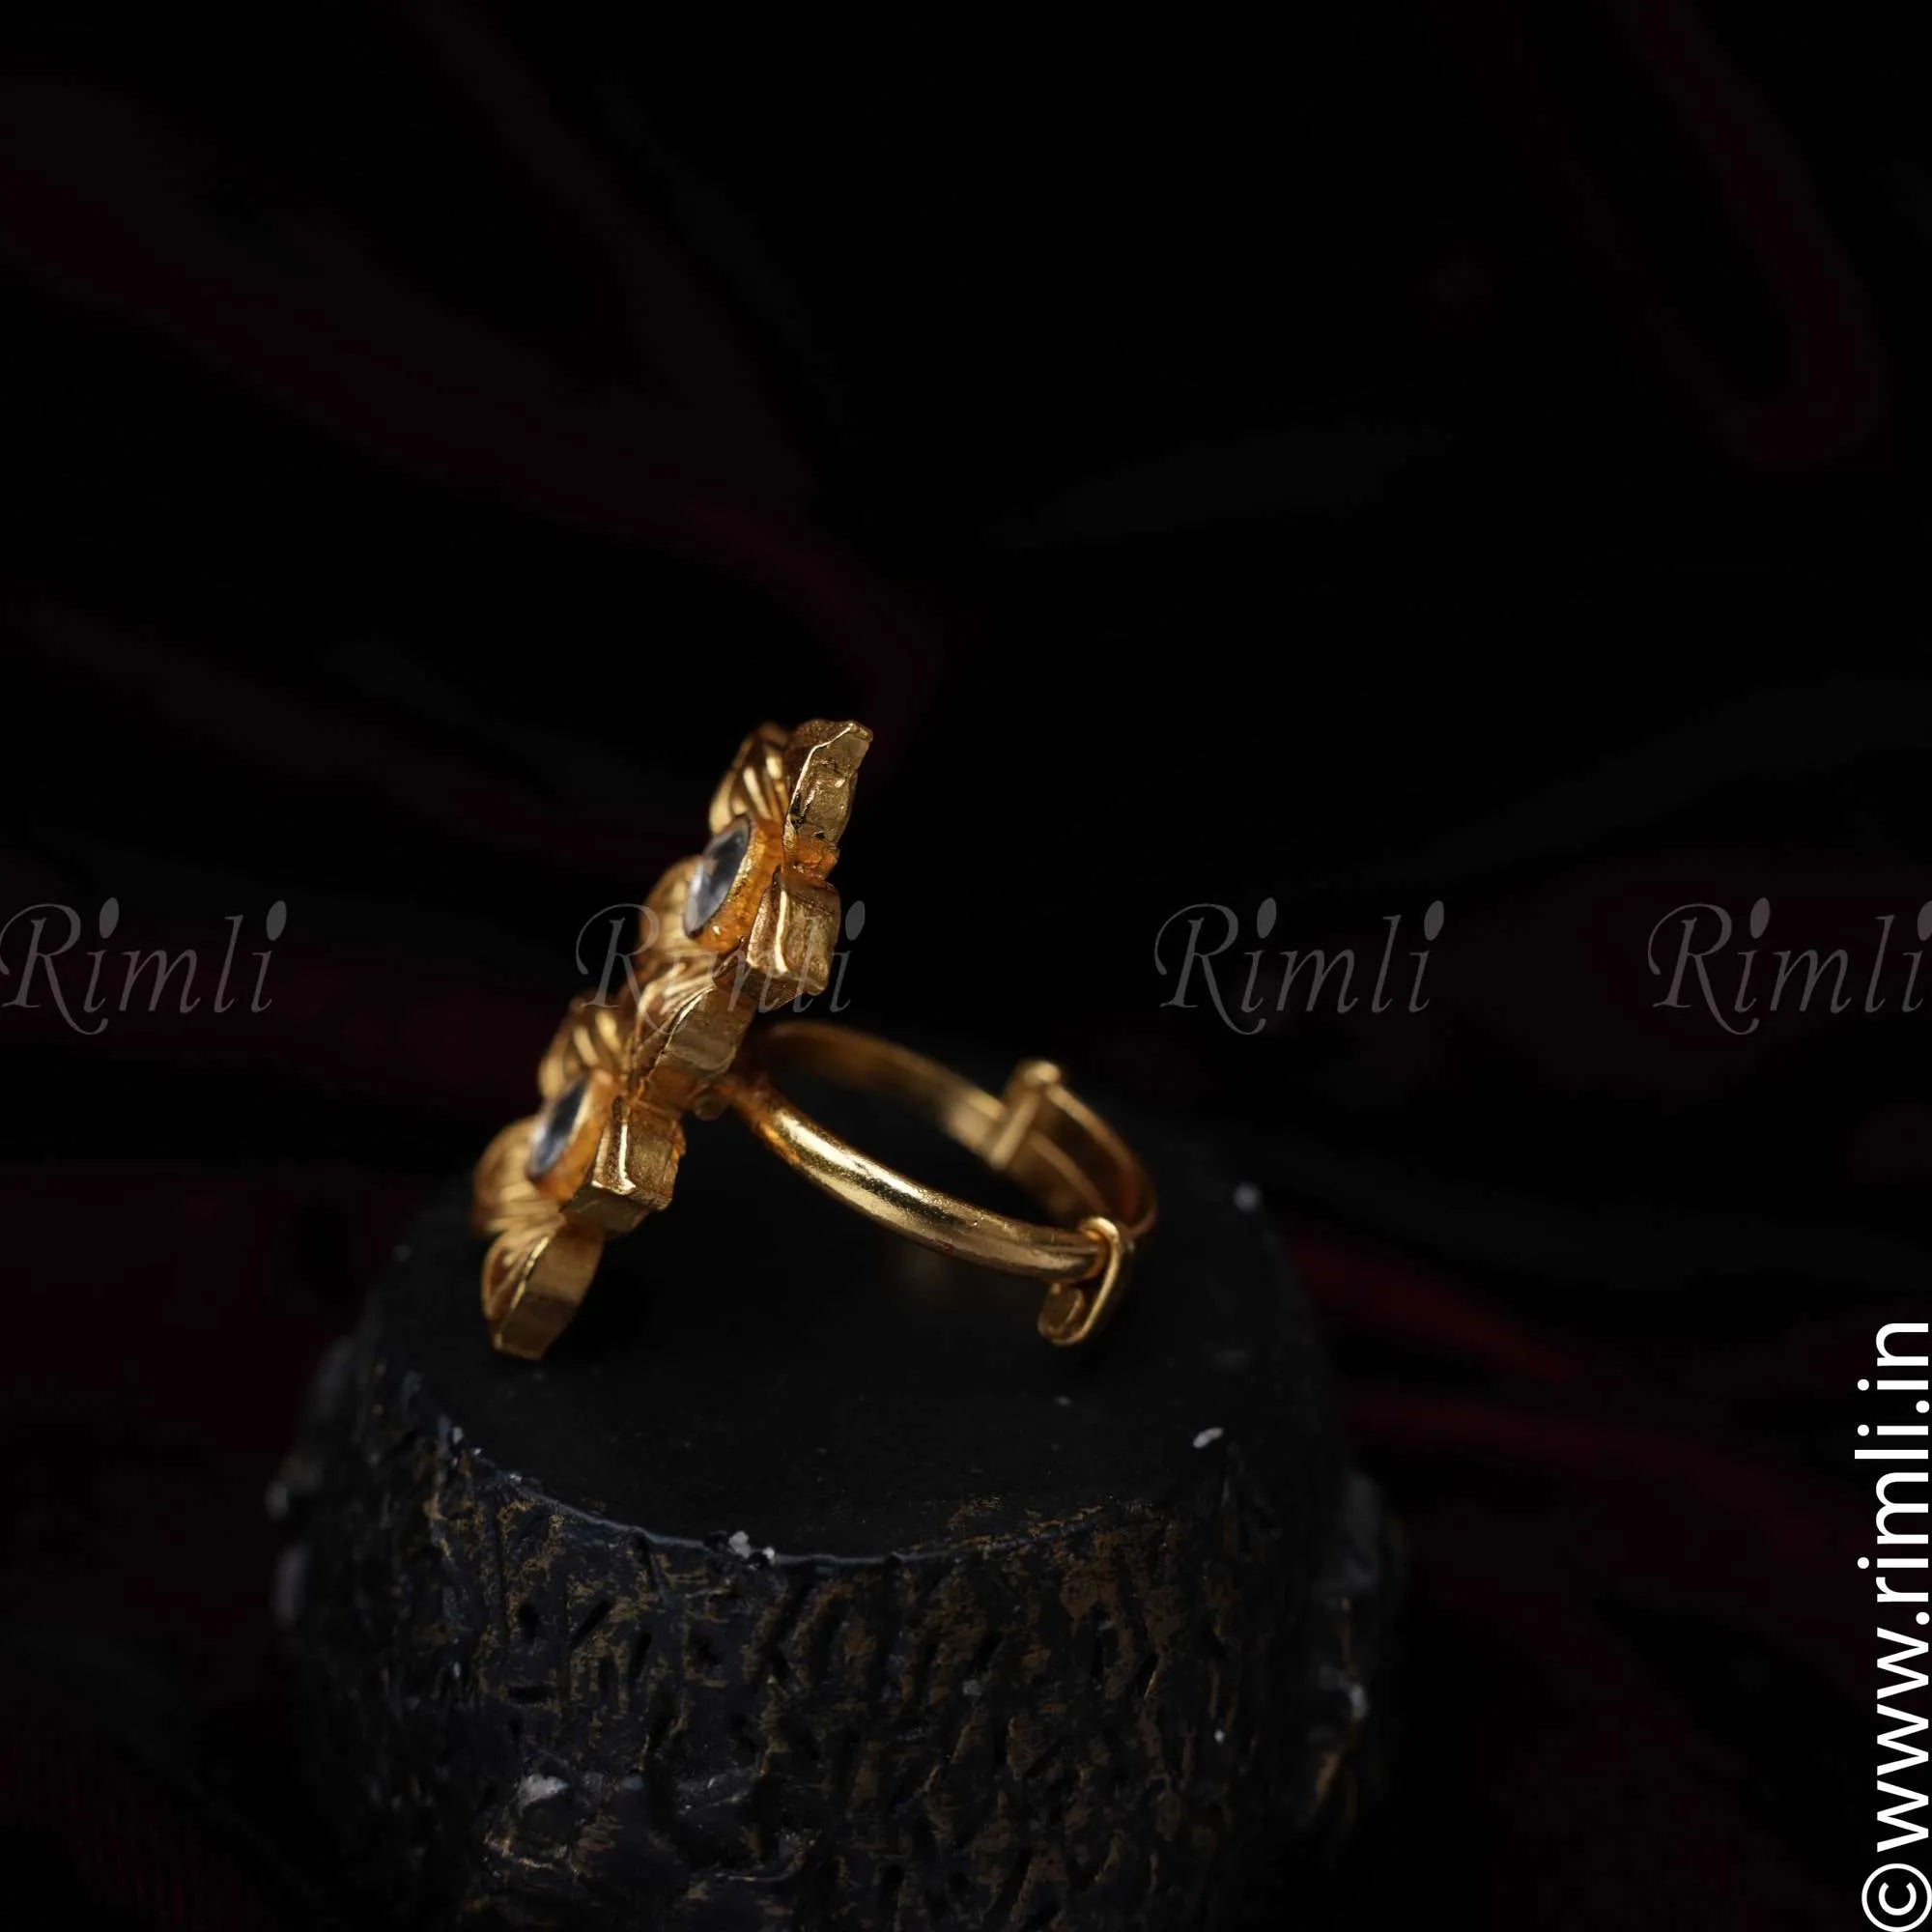 Ethnic Floral Ring